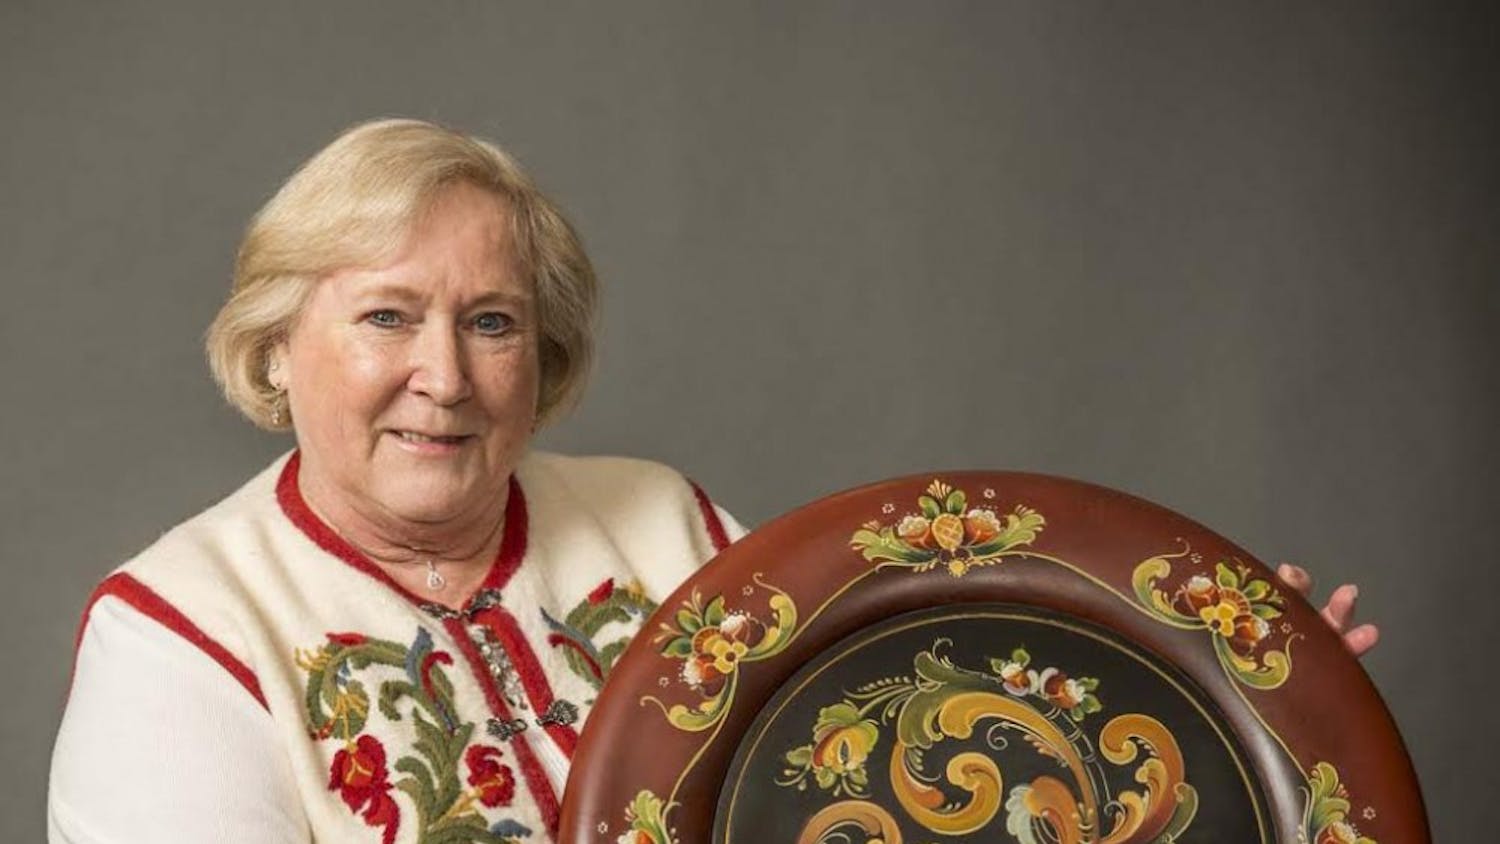 Jan Boettcher with an example of her work with rosemaling, a Norwegian painting technique. Boettcher will be one of two artists demonstrating their craft at the Mathers Museum of World Cultures on Thursday.